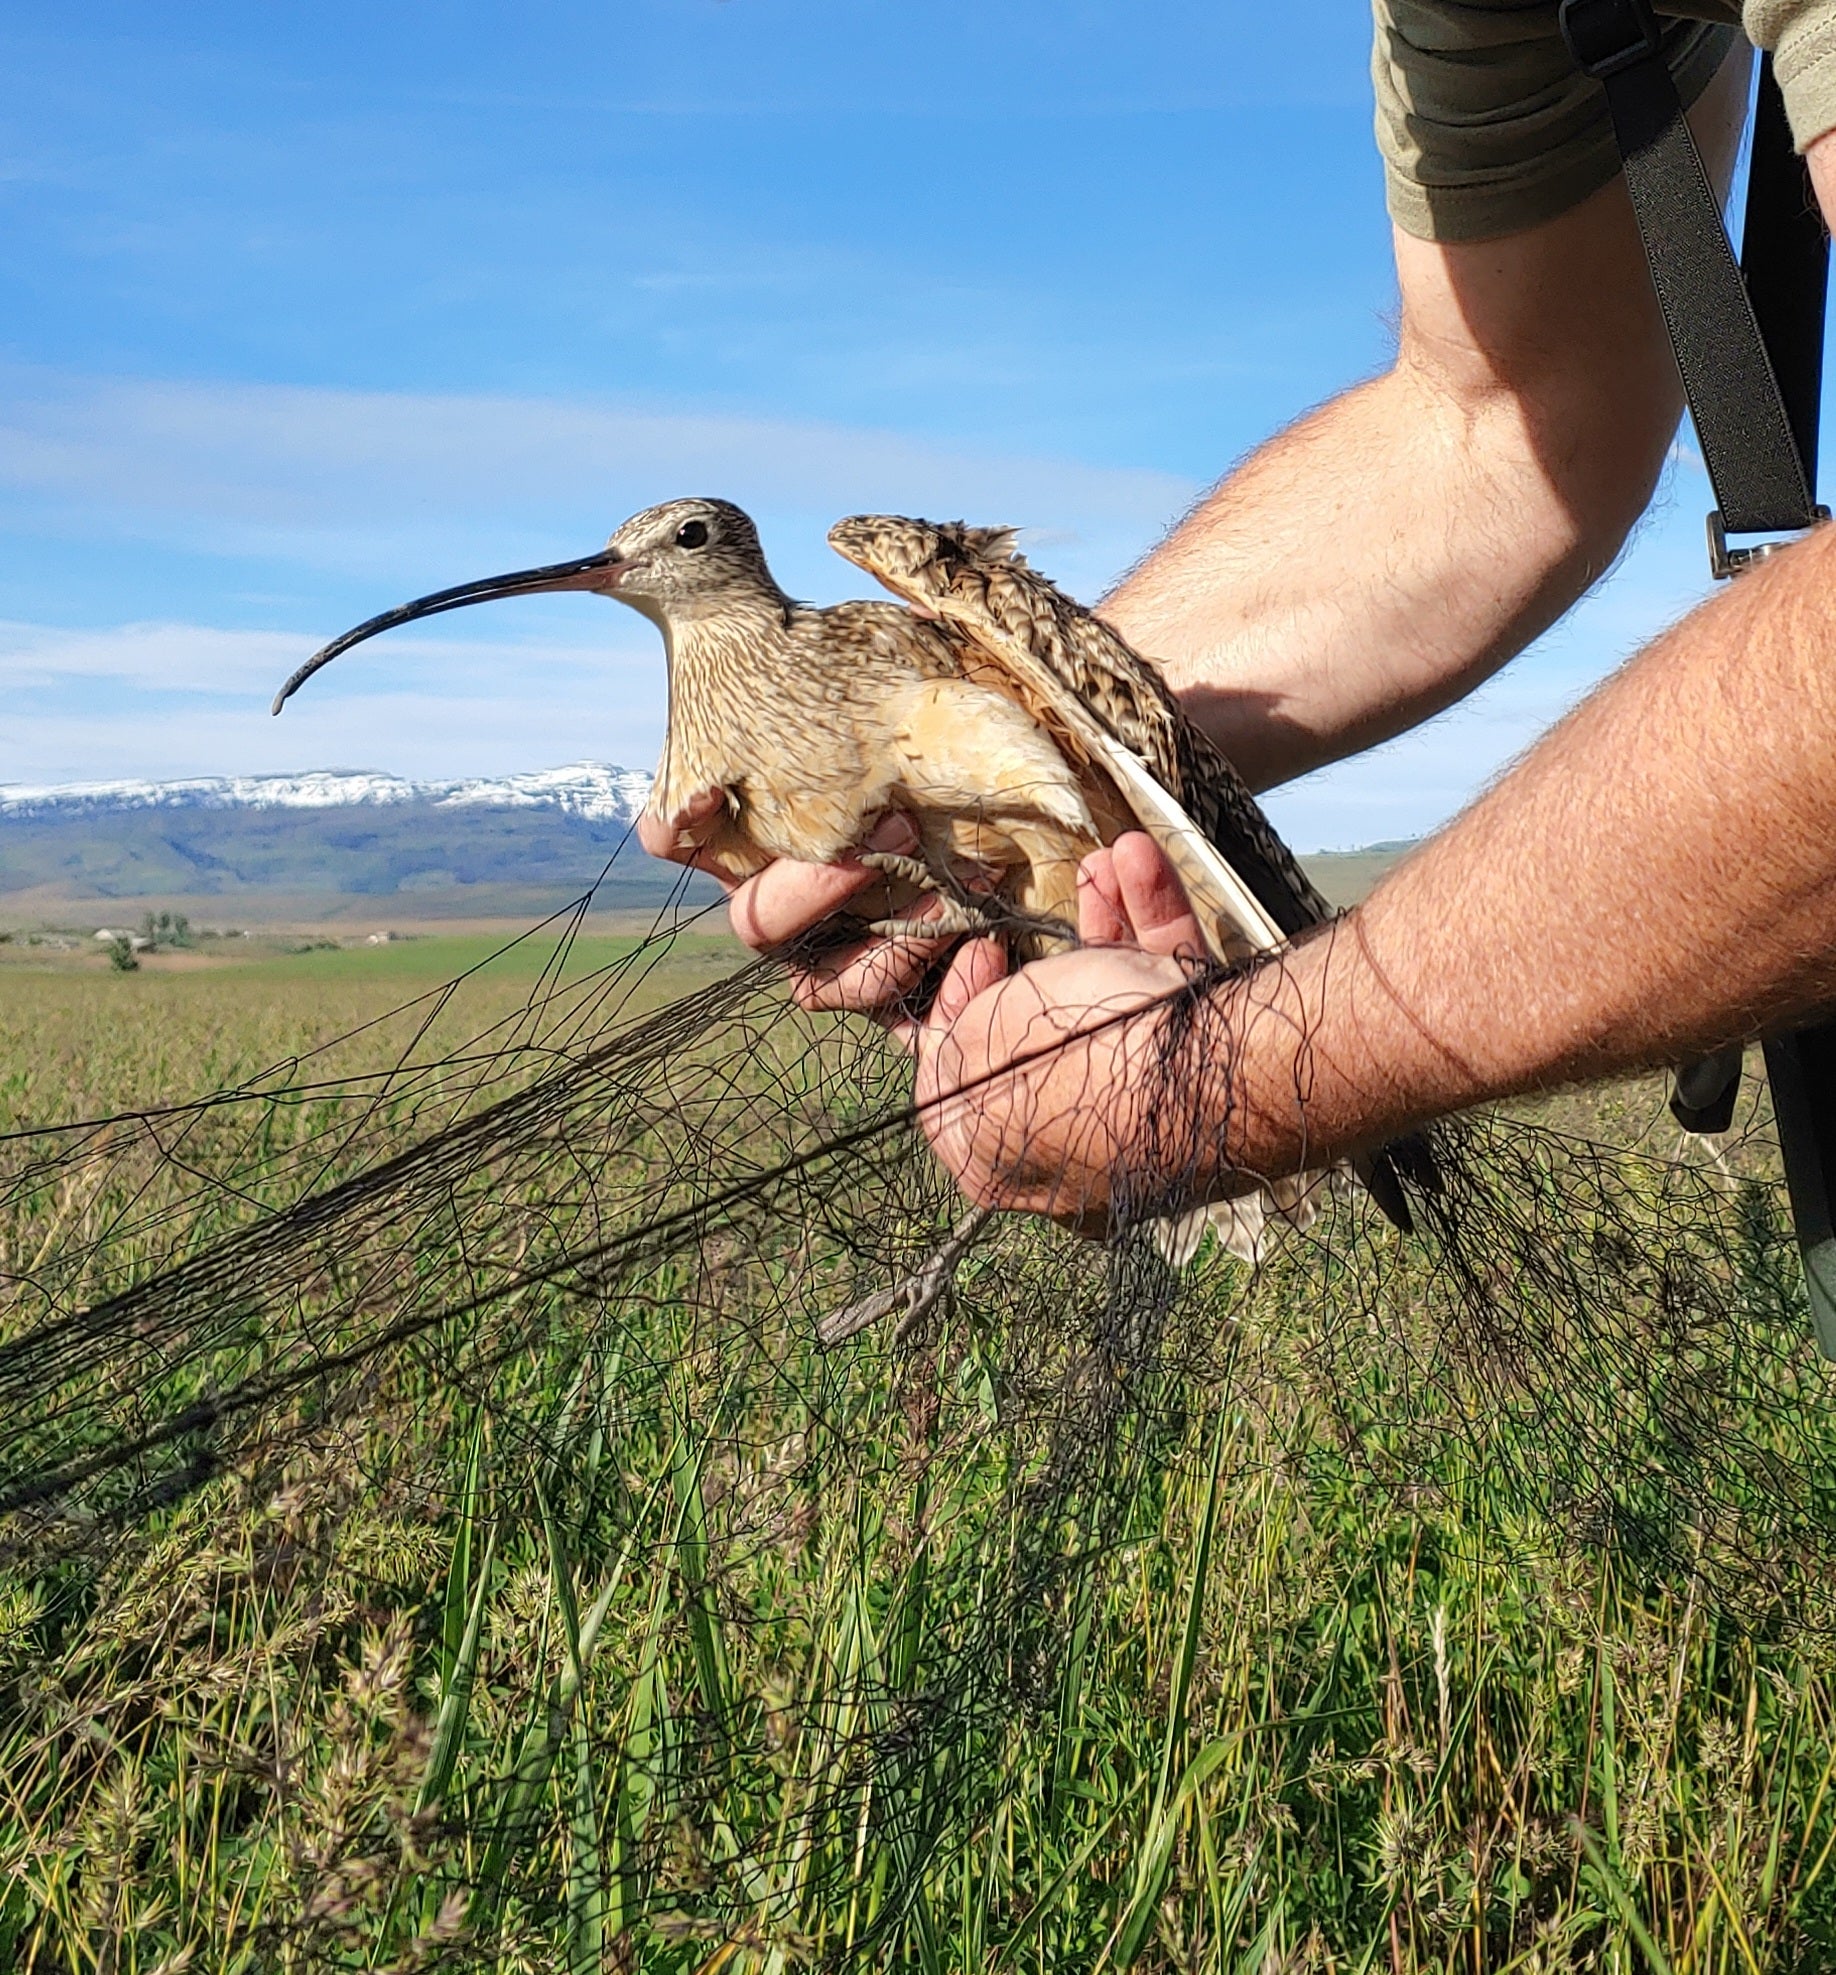 a biologist holds a curlew that is wrapped in thin black netting. One hand detangles the net while the other gently holds the bird. snowy mountains and grassland show in the background